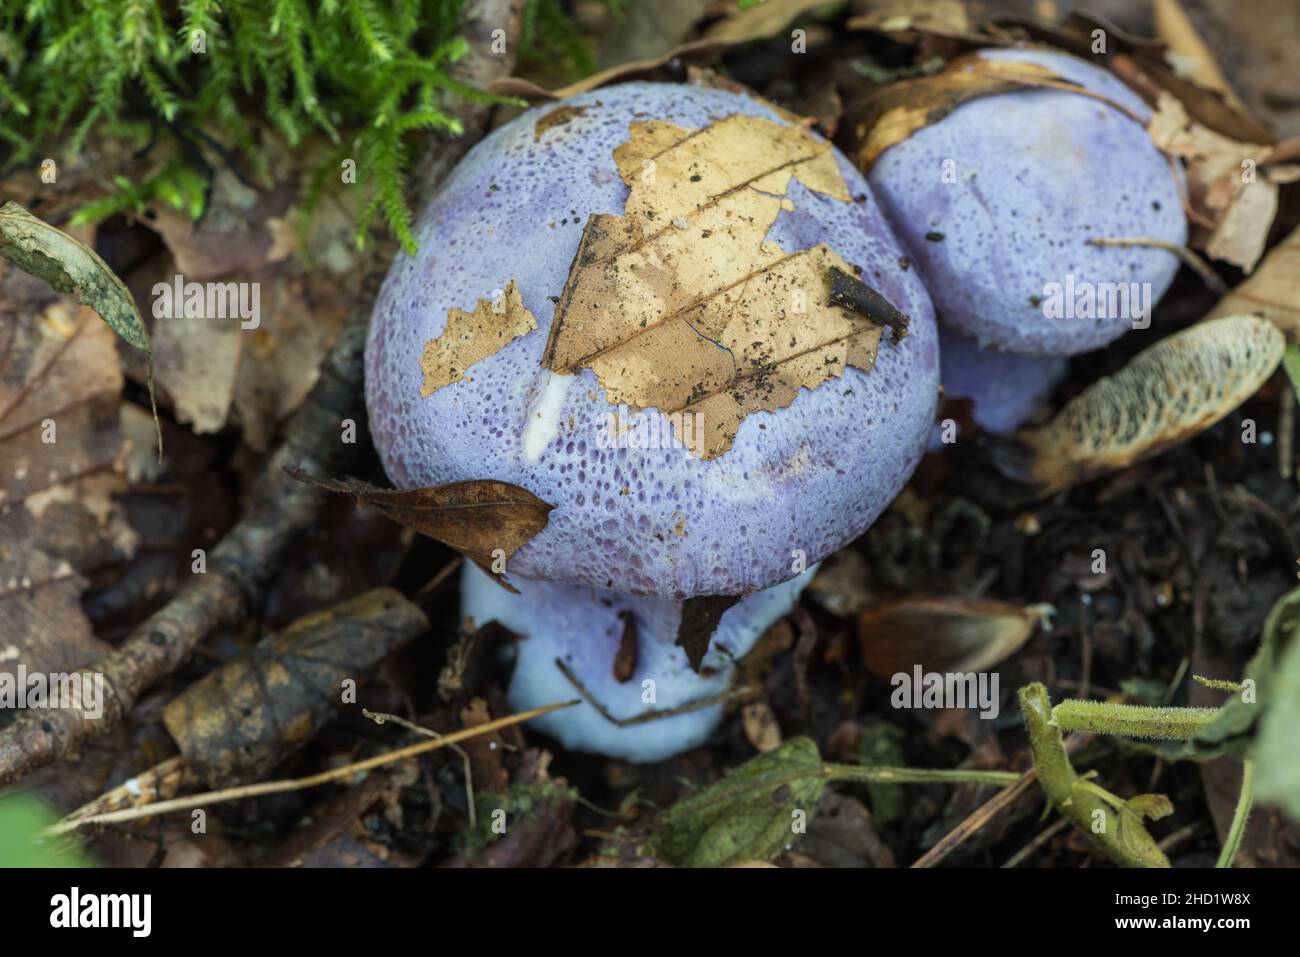 Fungus - Cortinarius sp. possibly C.caerulescens athough it may be Cortinarius calochrous) Stock Photo